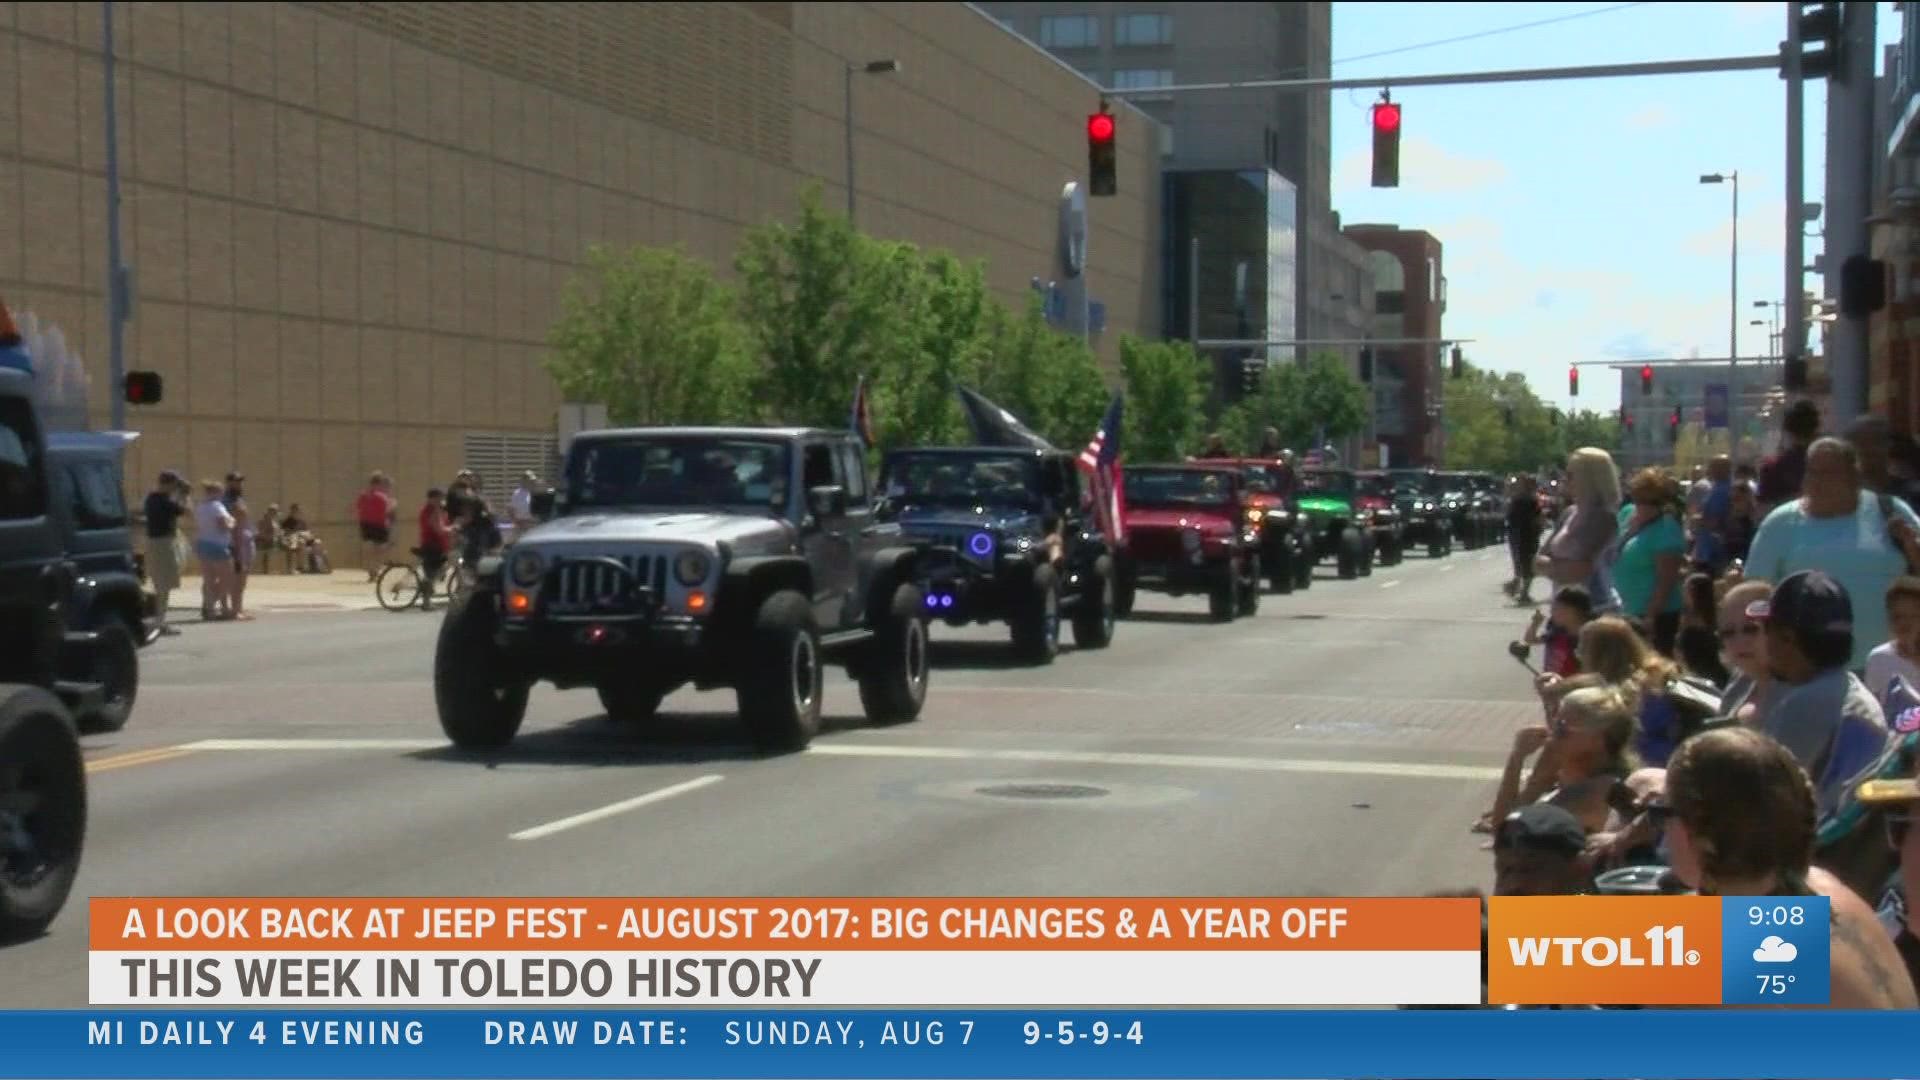 Let's take a look at Jeep Fest in this week's trip through Toledo History.